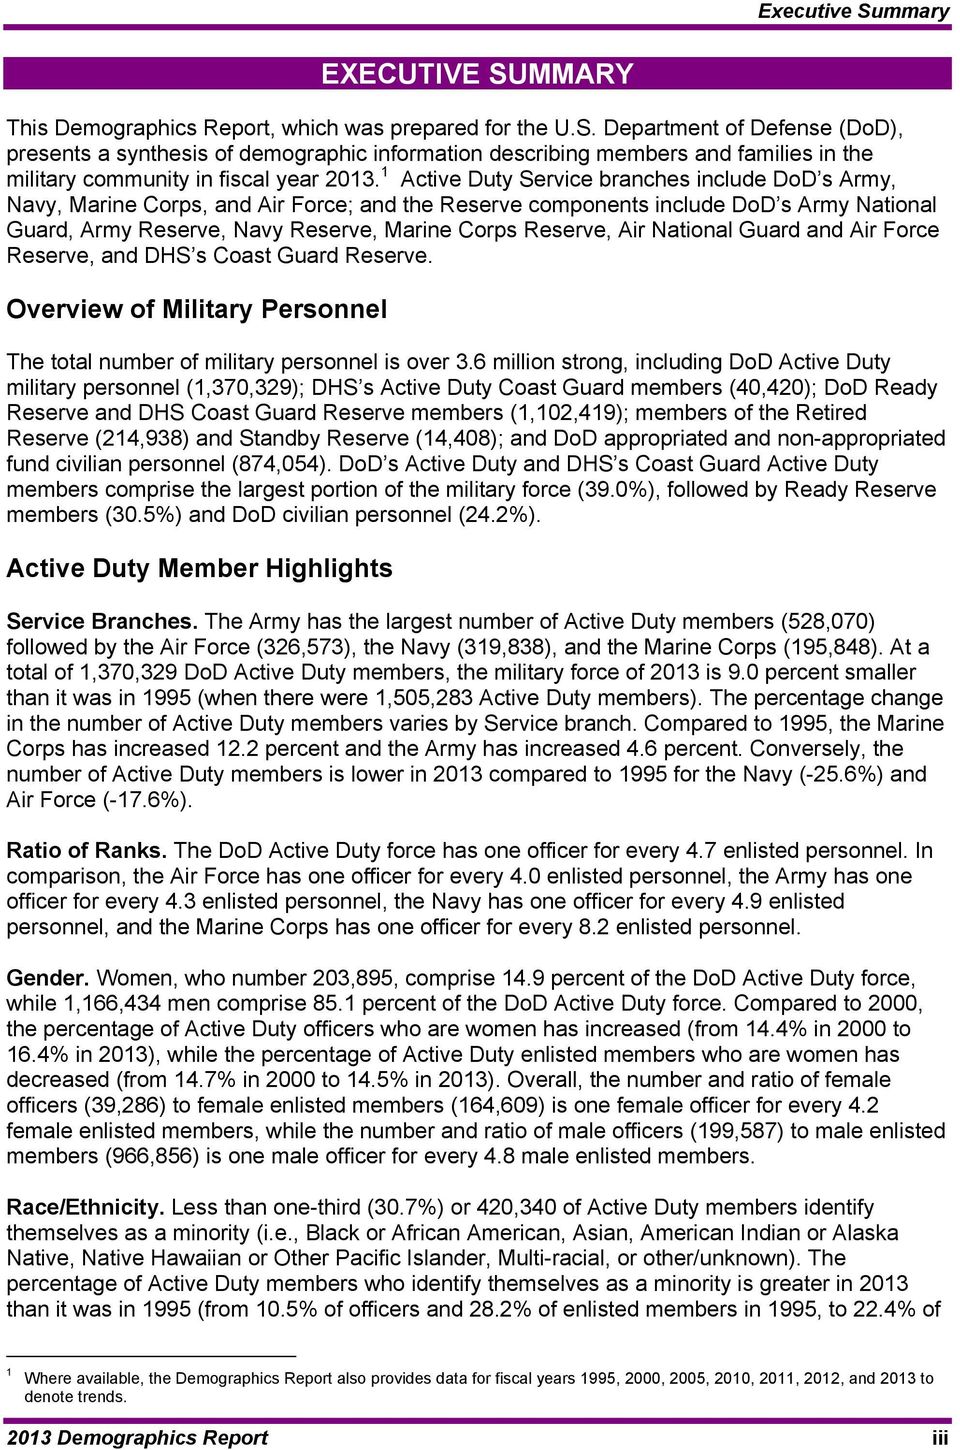 Air National Guard and Air Force Reserve, and DHS s Coast Guard Reserve. Overview of Military Personnel The total number of military personnel is over 3.